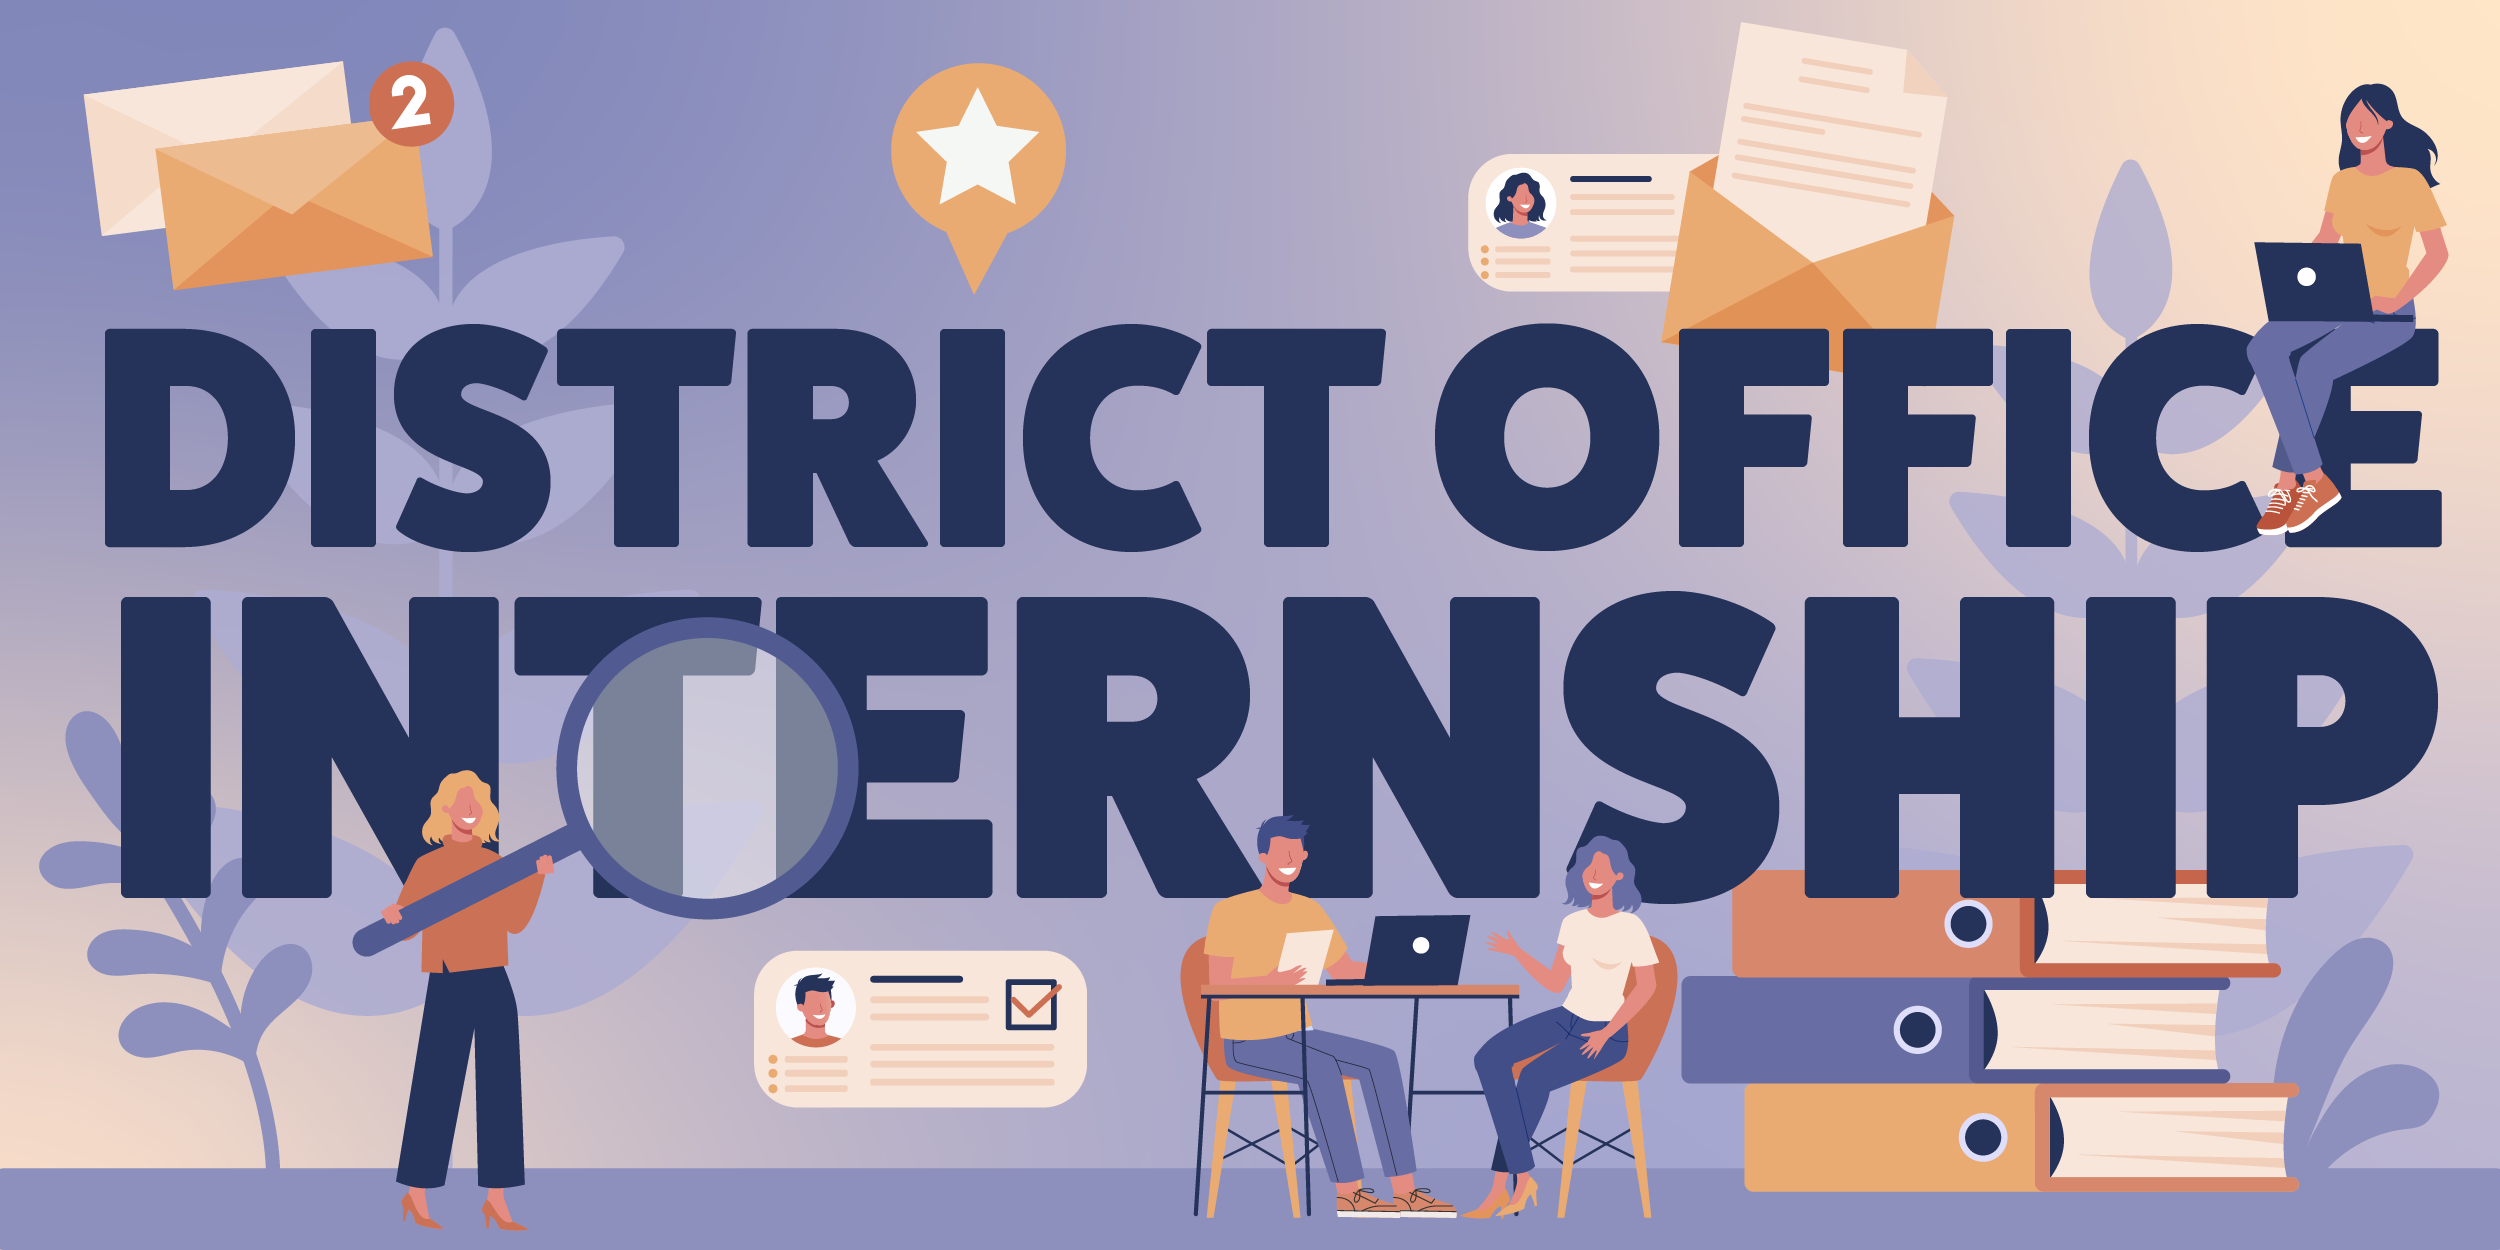 District Office Internship - illustration of office workers